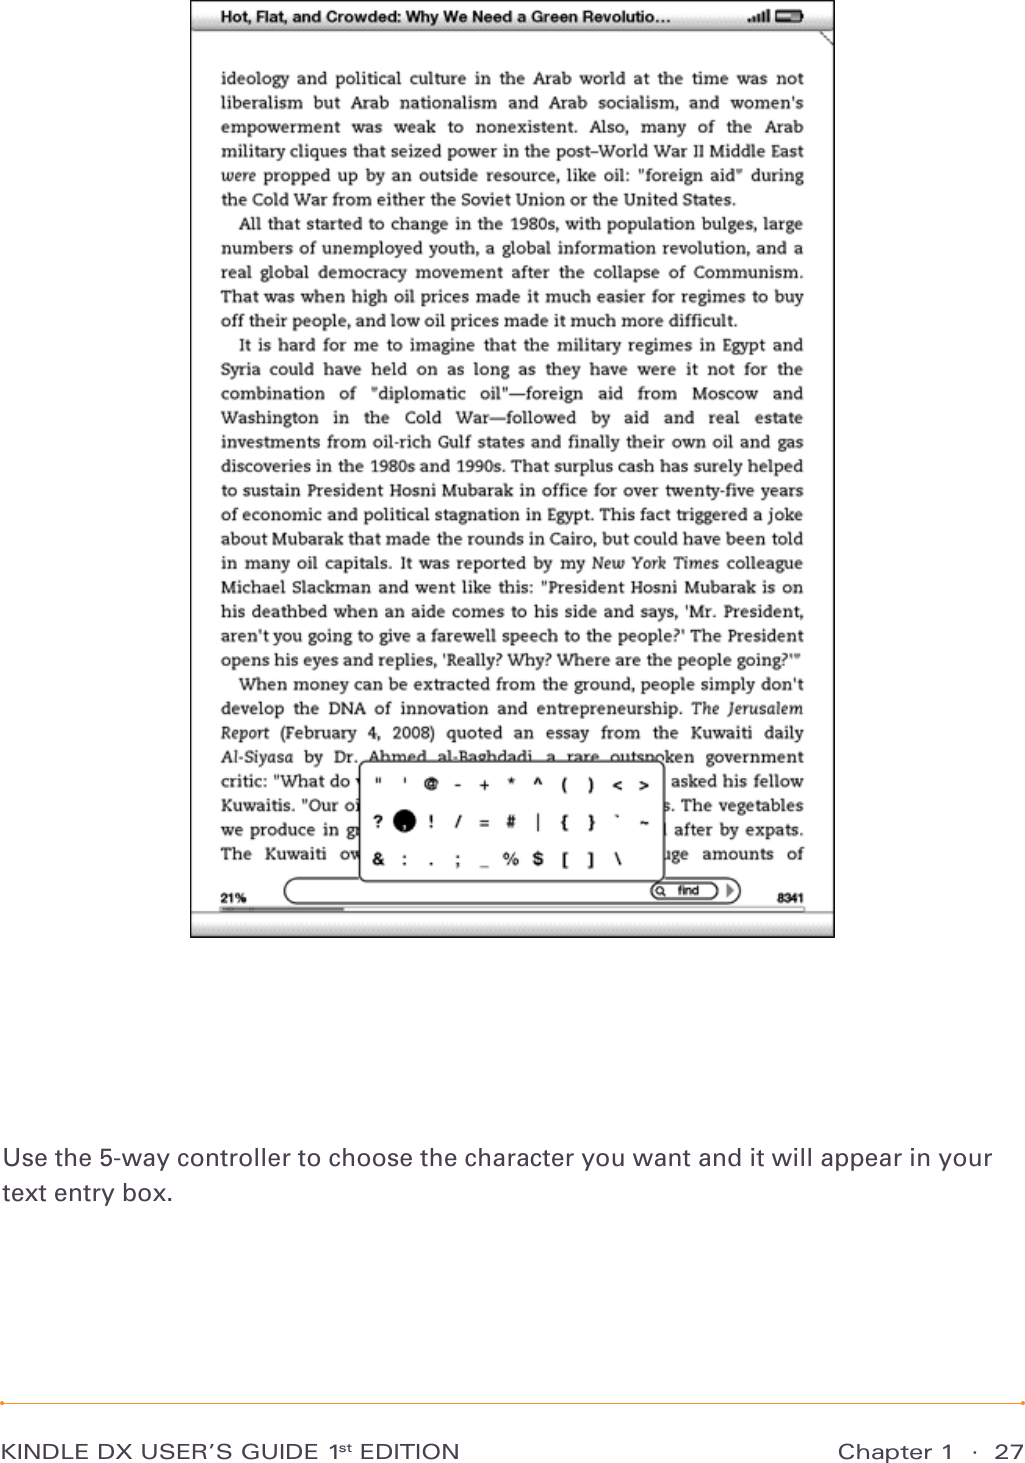 Chapter 1  ·  27KINDLE DX USER’S GUIDE 1st EDITIONUse the 5-way controller to choose the character you want and it will appear in your text entry box.